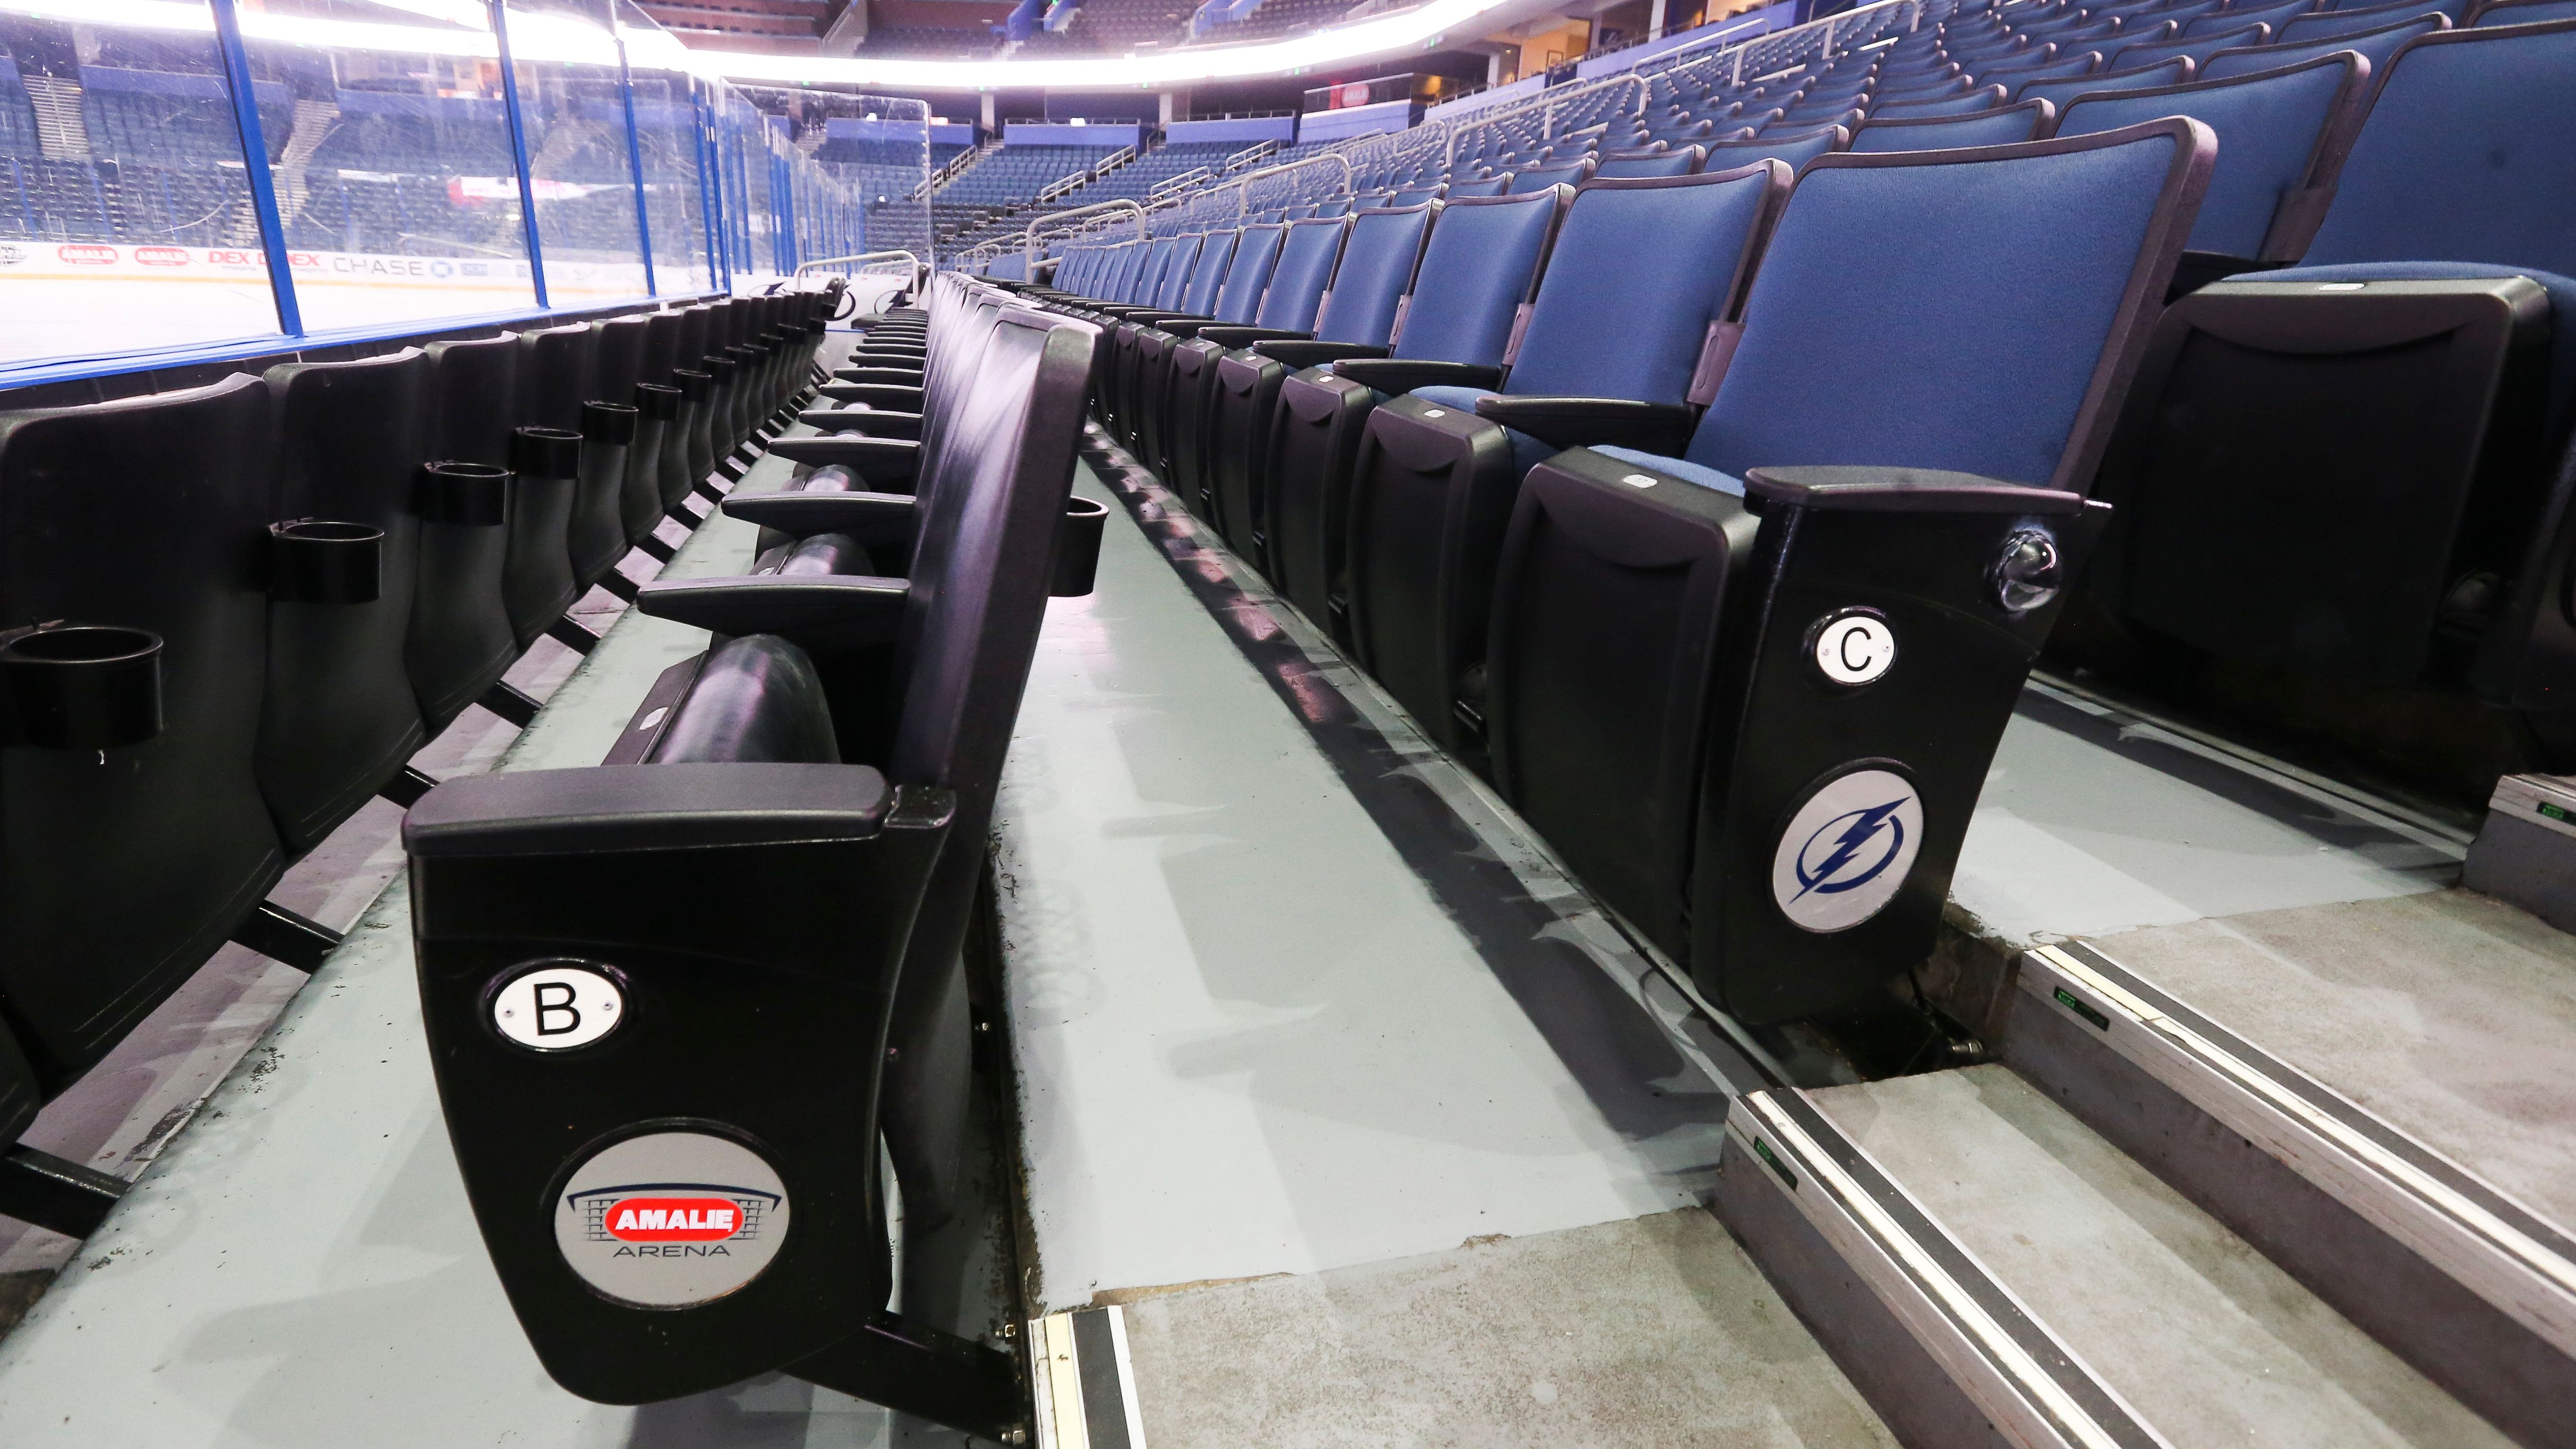 10 Changes You'll See At Amalie Arena As It Reopens